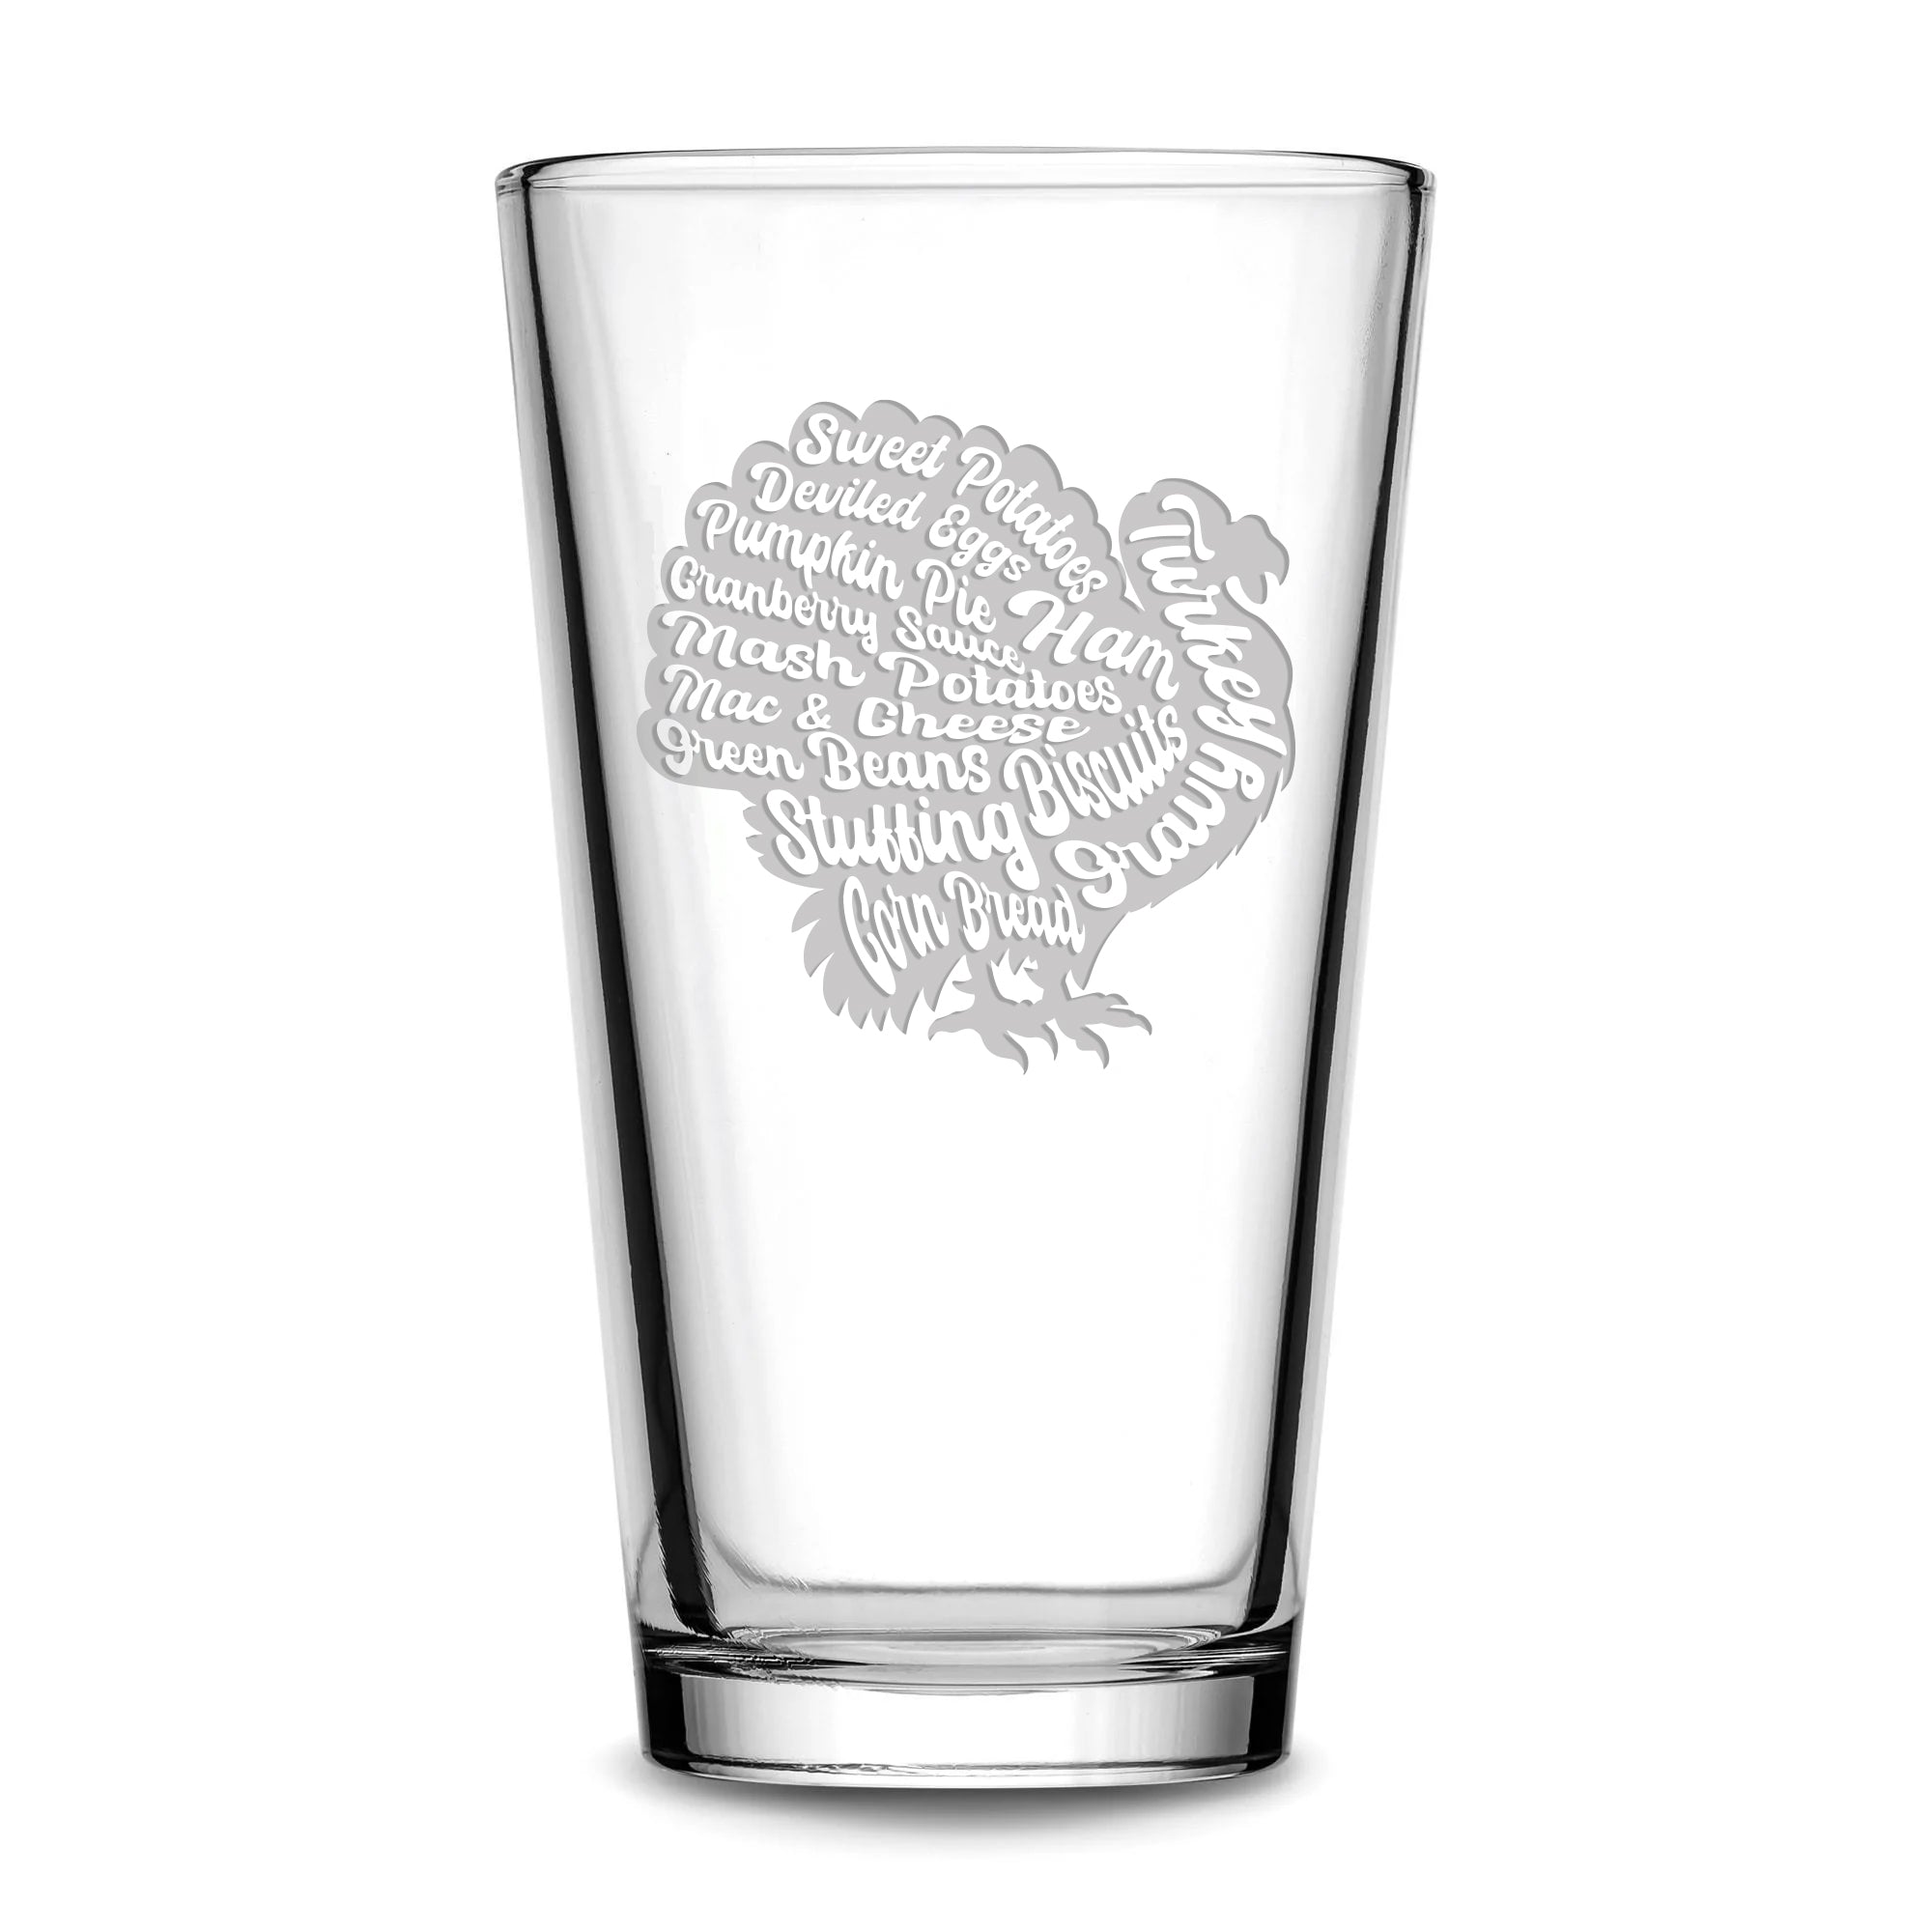 Premium Eat, Turkey Season, Pint Glass, 16oz, Laser Etched or Hand Etched